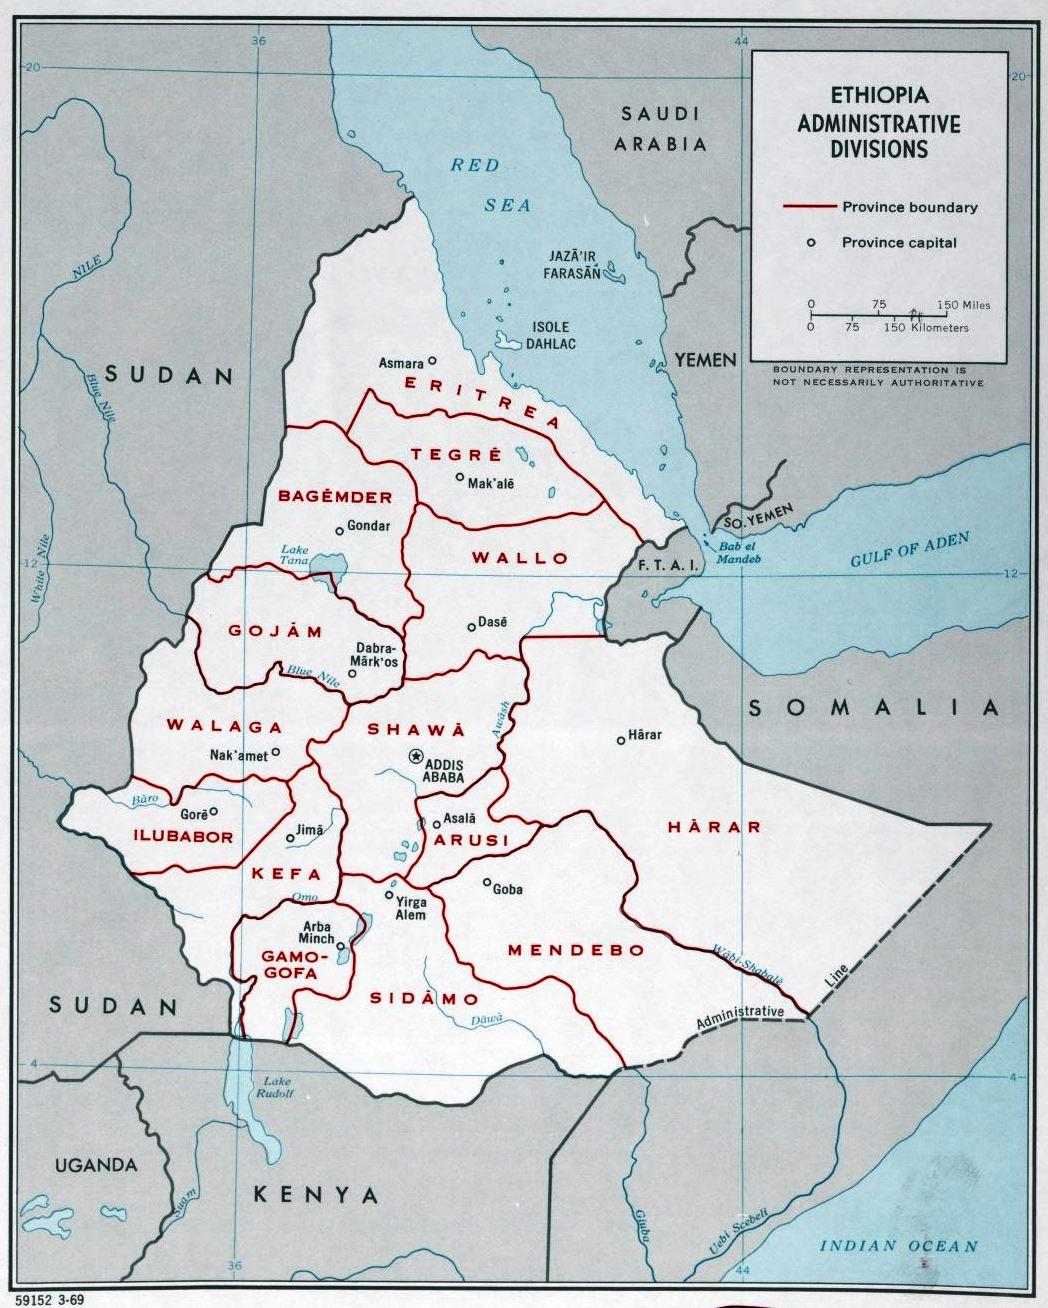 old ethiopian administrative divisions map 1969